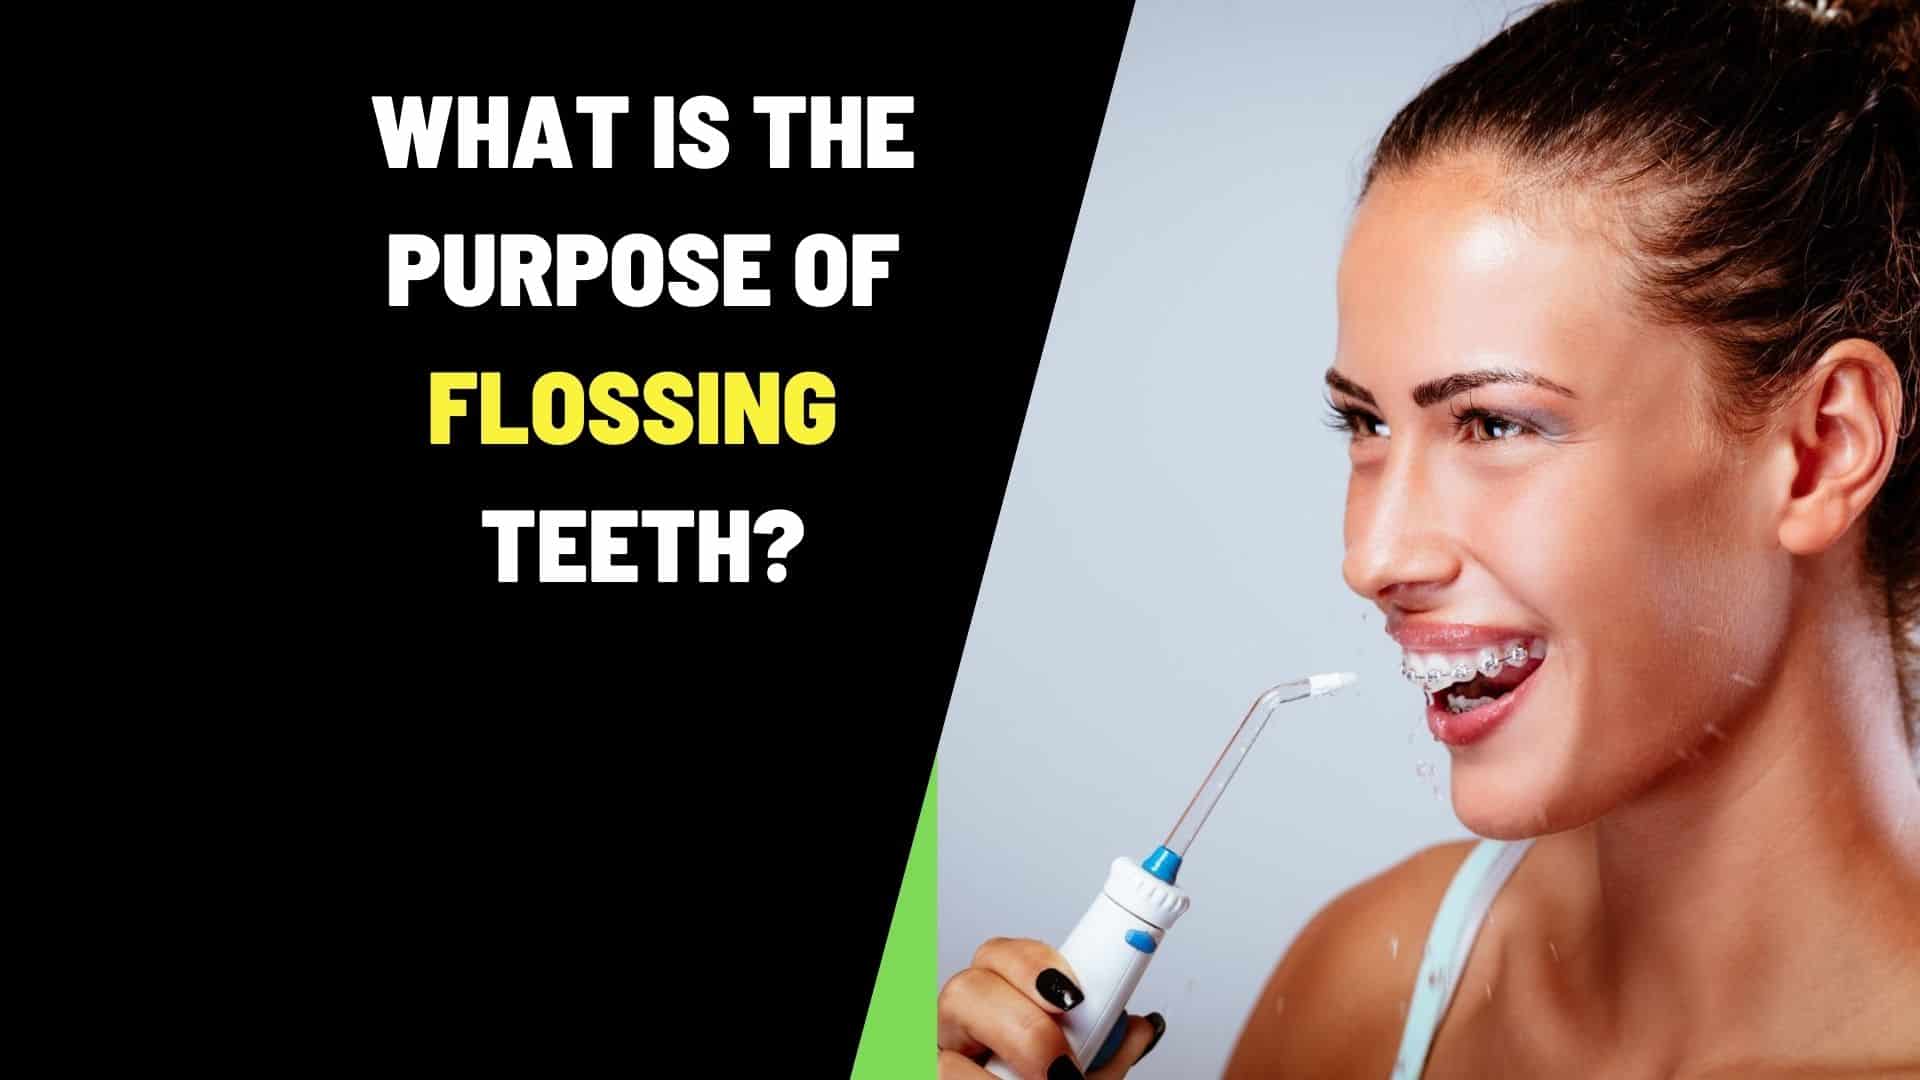 What is the importance of flossing teeth daily